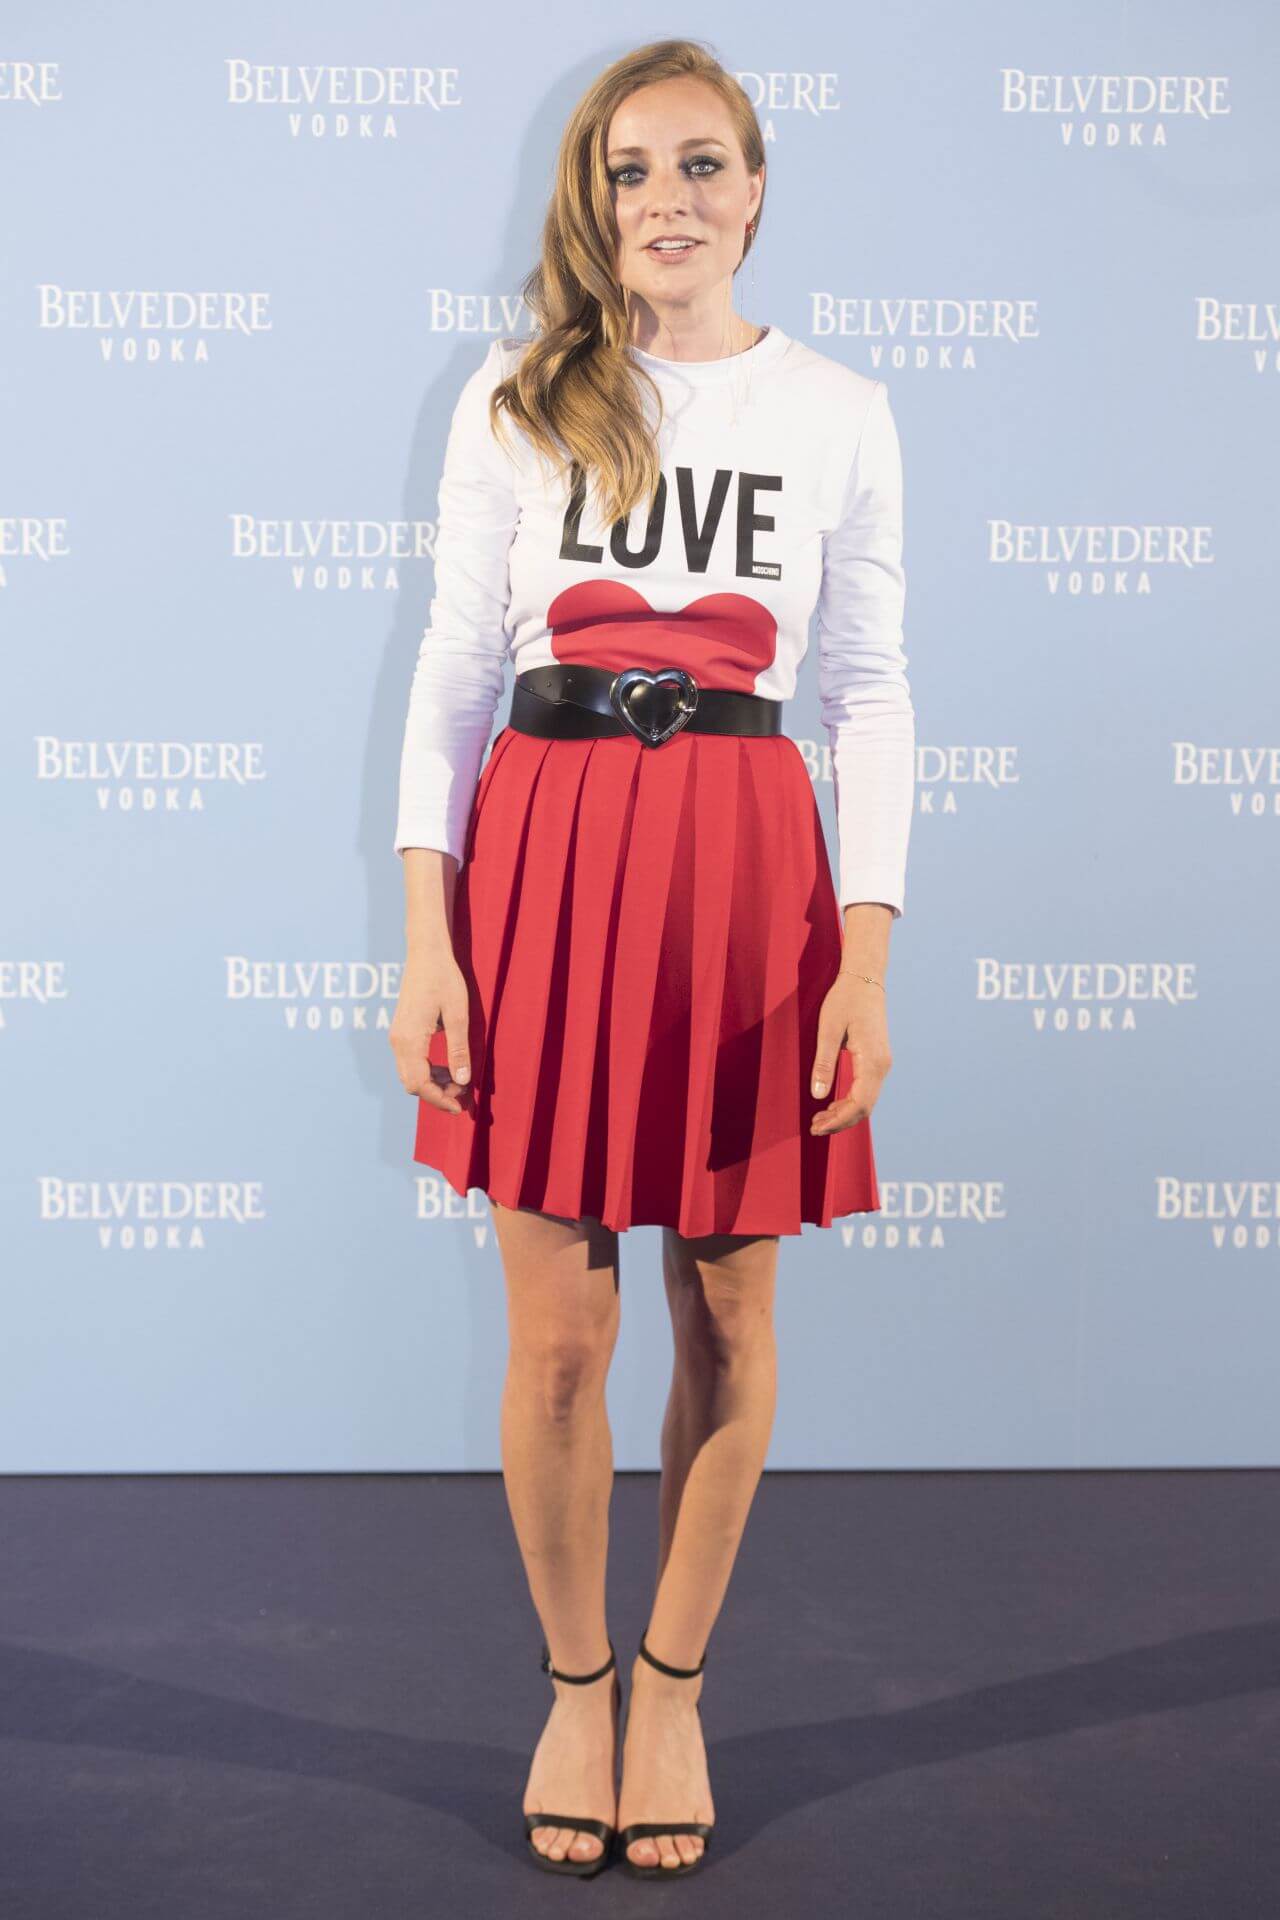 Angela Cremonte In White Full Sleeves T-Shirt With Red Pleated Mini Skirt Outfits Belvedere Vodka Party in Madrid, Spain